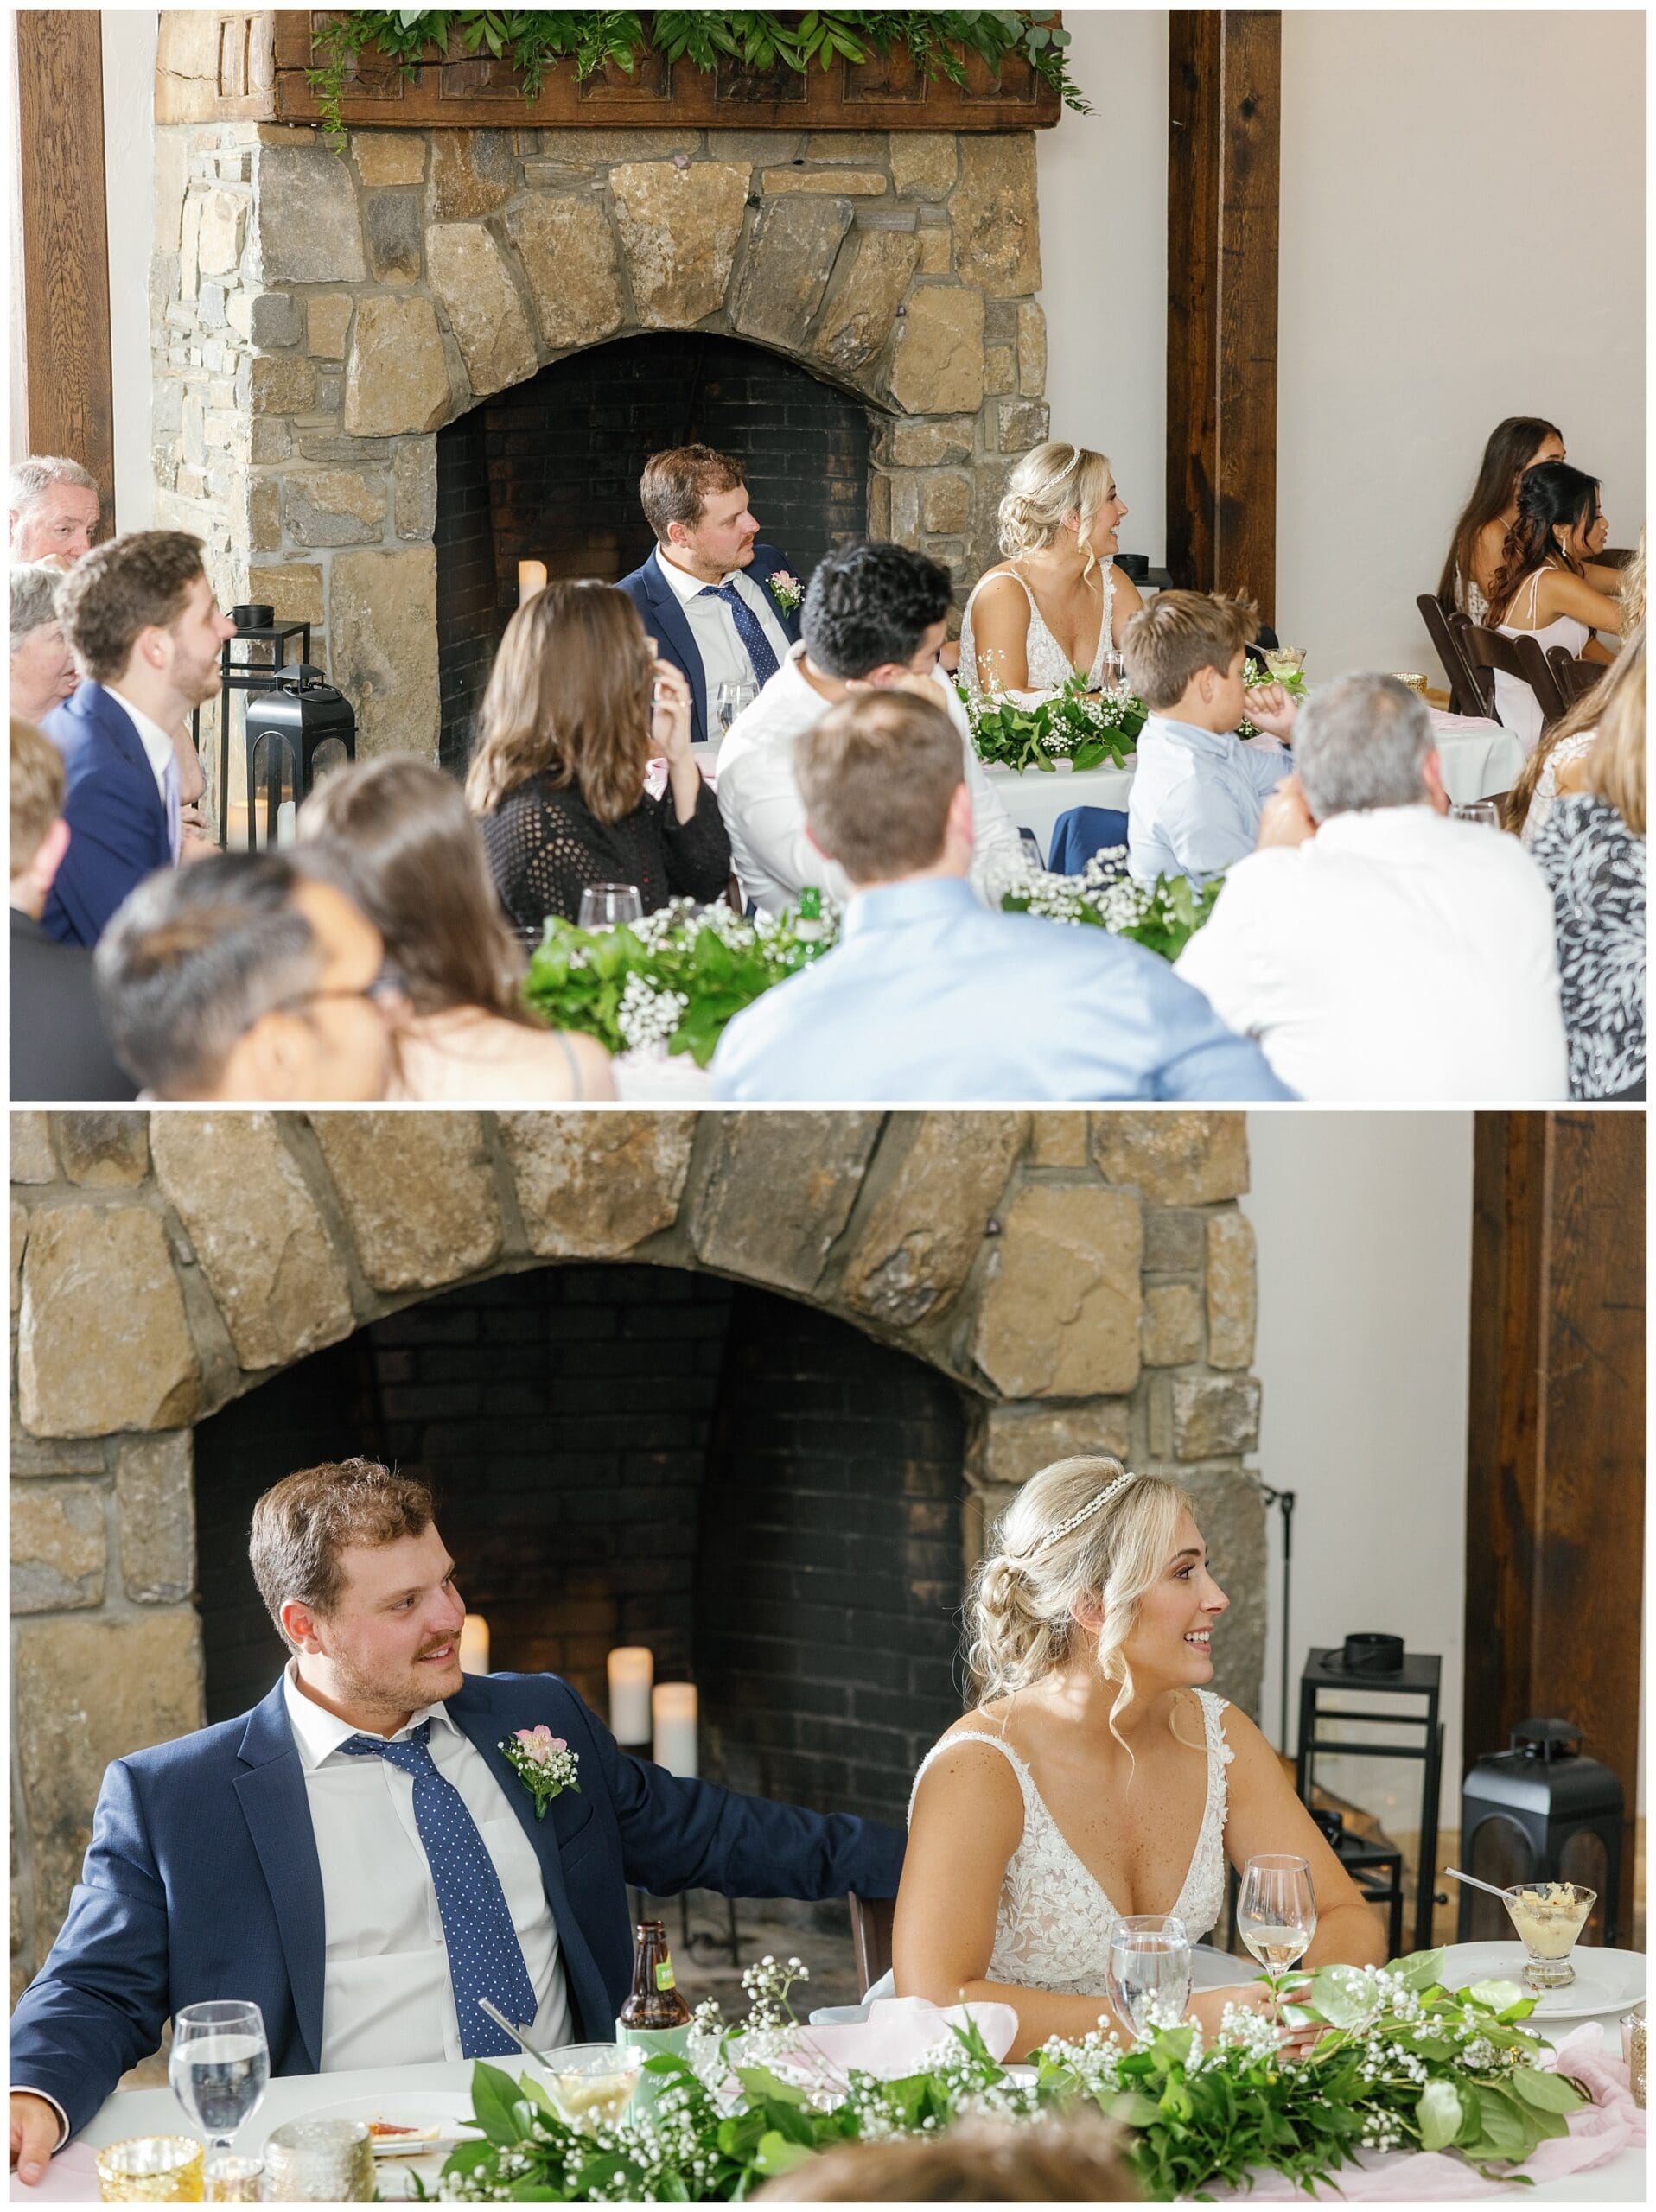 A bride and groom sitting at a table in front of a fireplace.